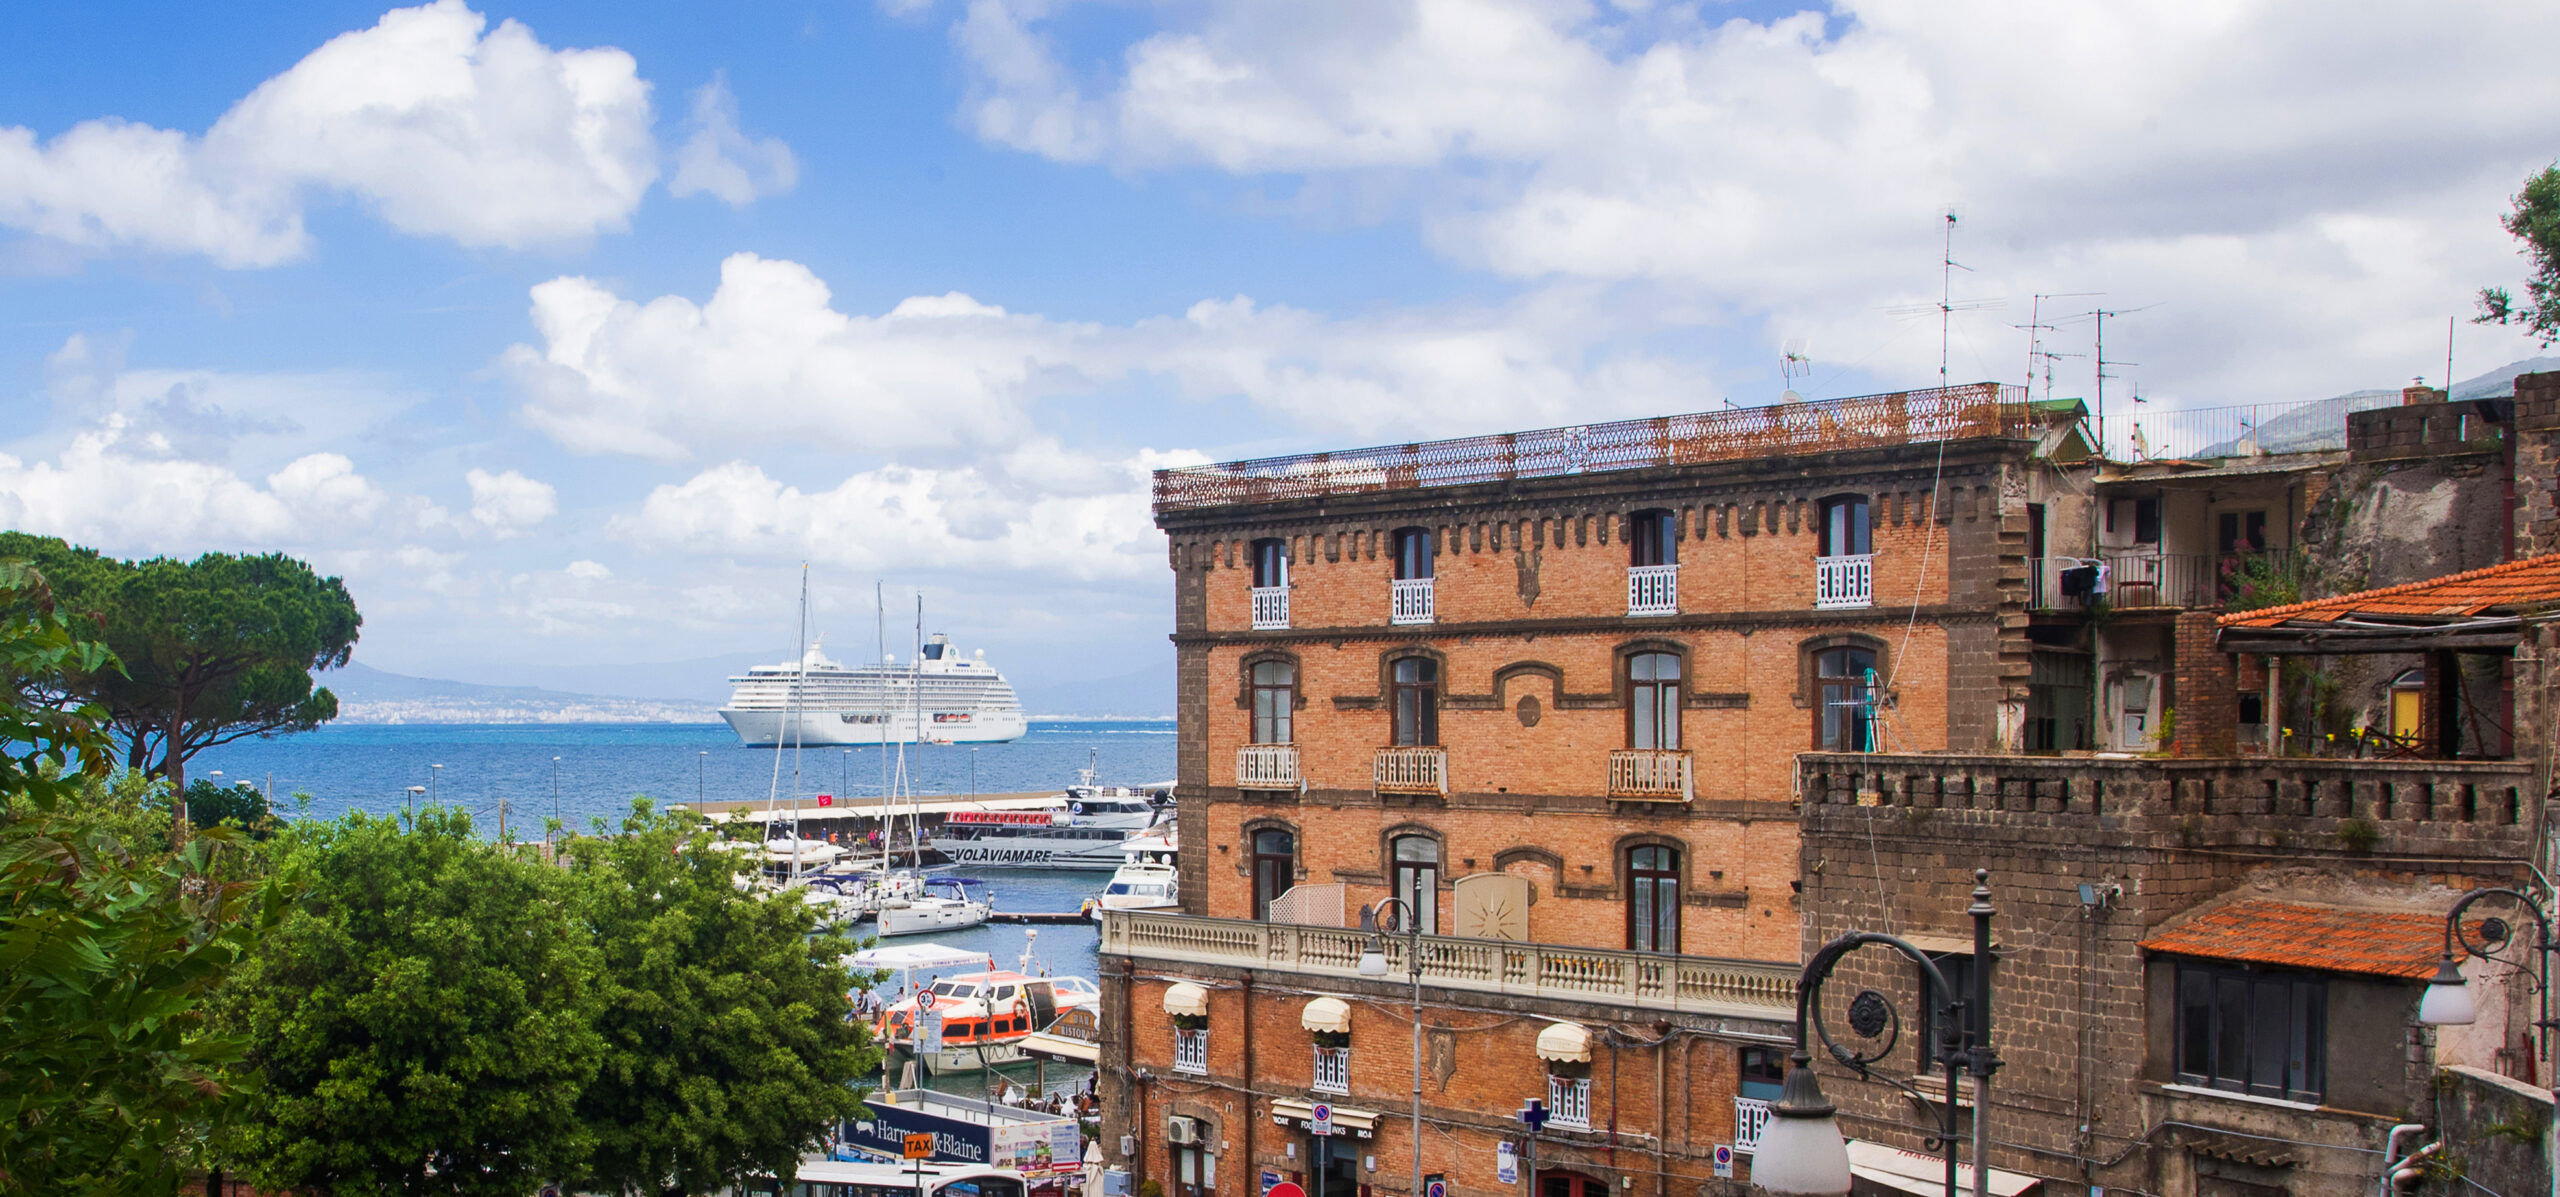 Capturing the World Aboard Crystal Cruises: My Maiden Voyage from Sorrento, Italy